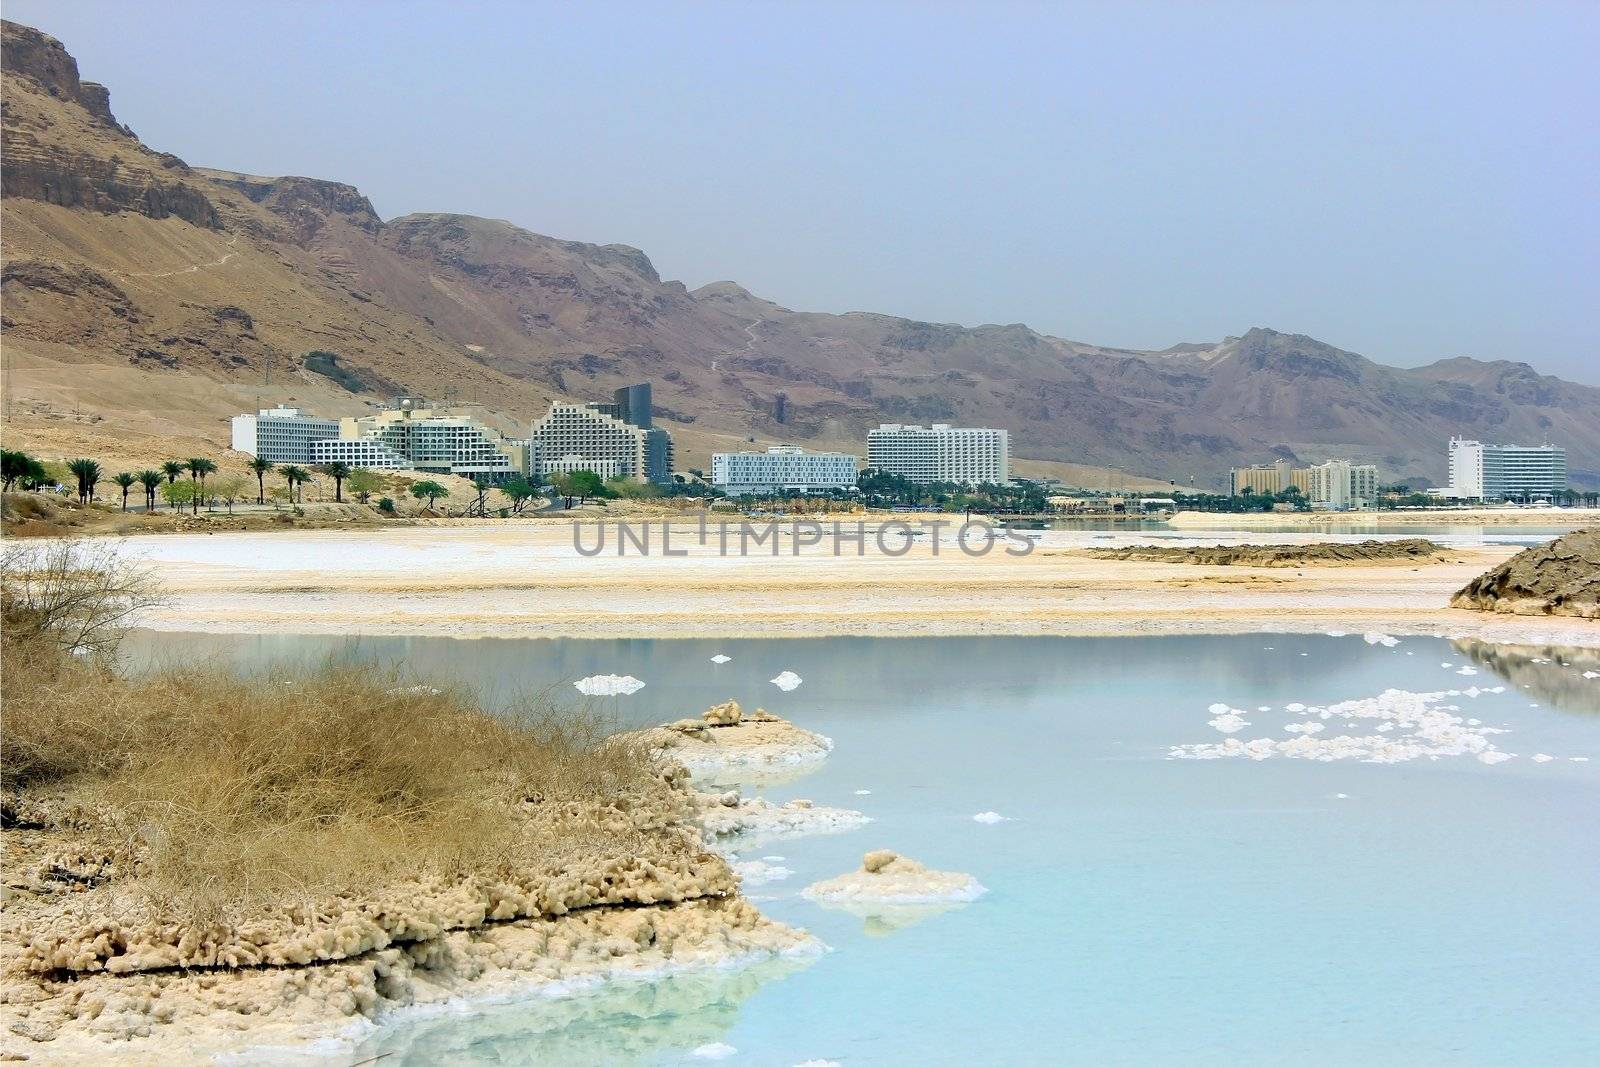 Landscapes of the Dead Sea.view of the hotels, the Israeli coast